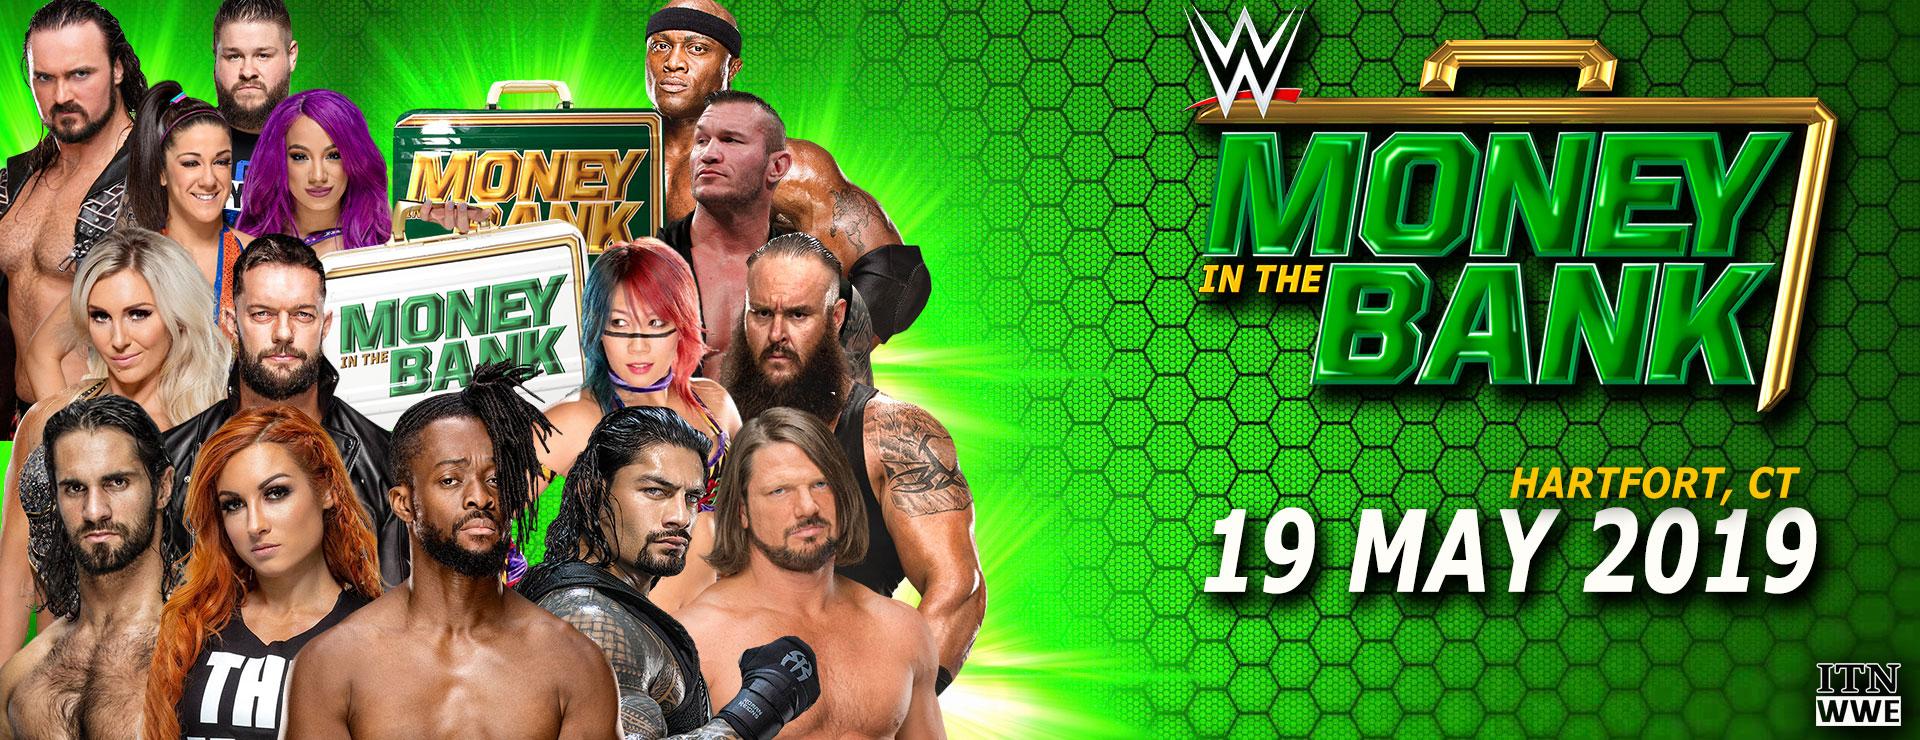 Money In The Bank 2019, Date, Location, Match Card, Results